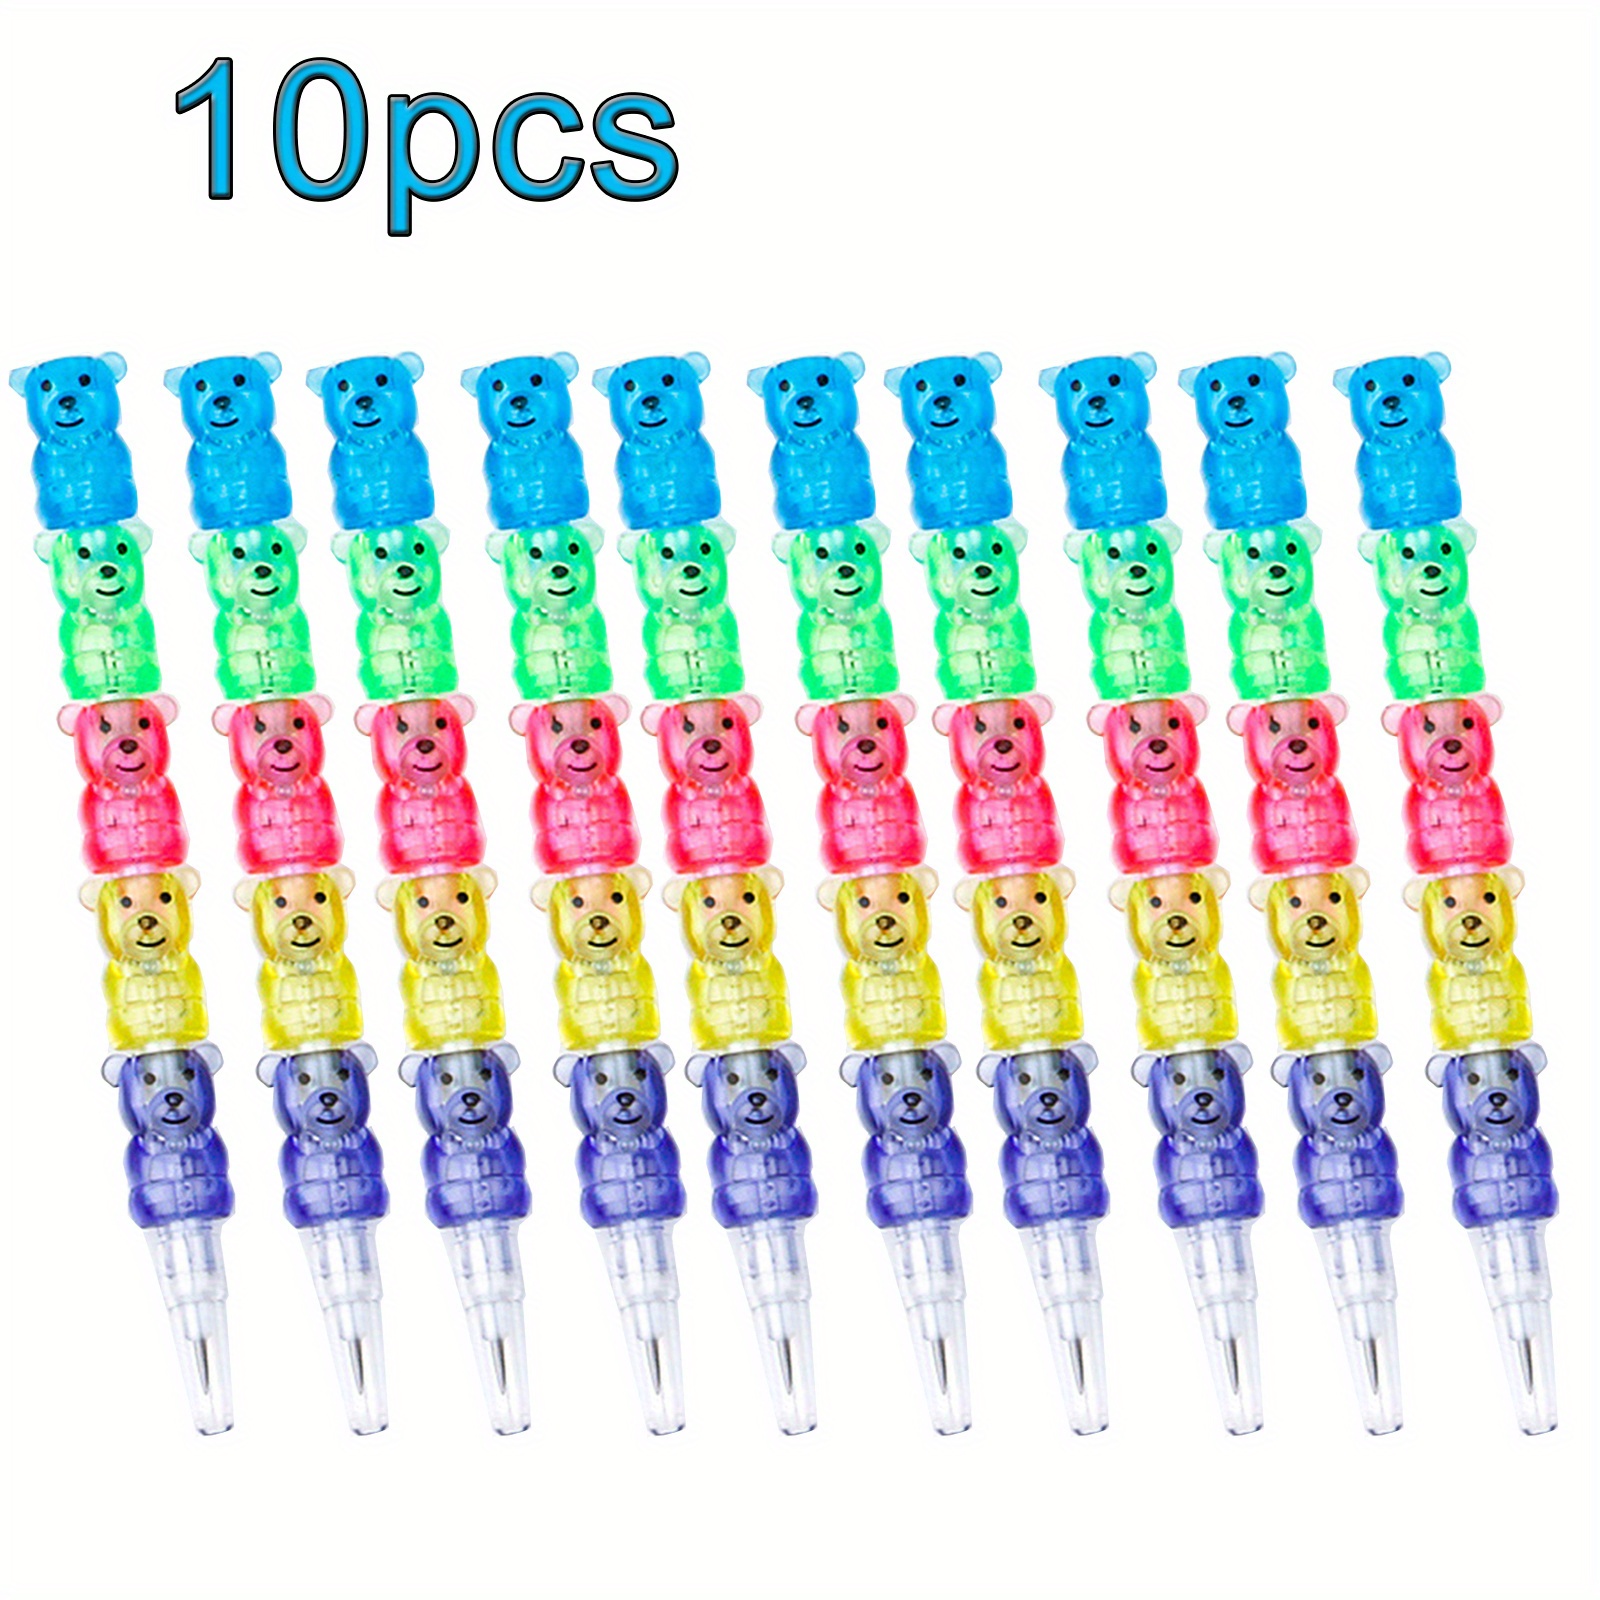 MAGICLULU 15Pcs bear building block pencil 5 in 1 stacking pencil  changeable pencil construction pencil childrens gifts buildable pencil  children